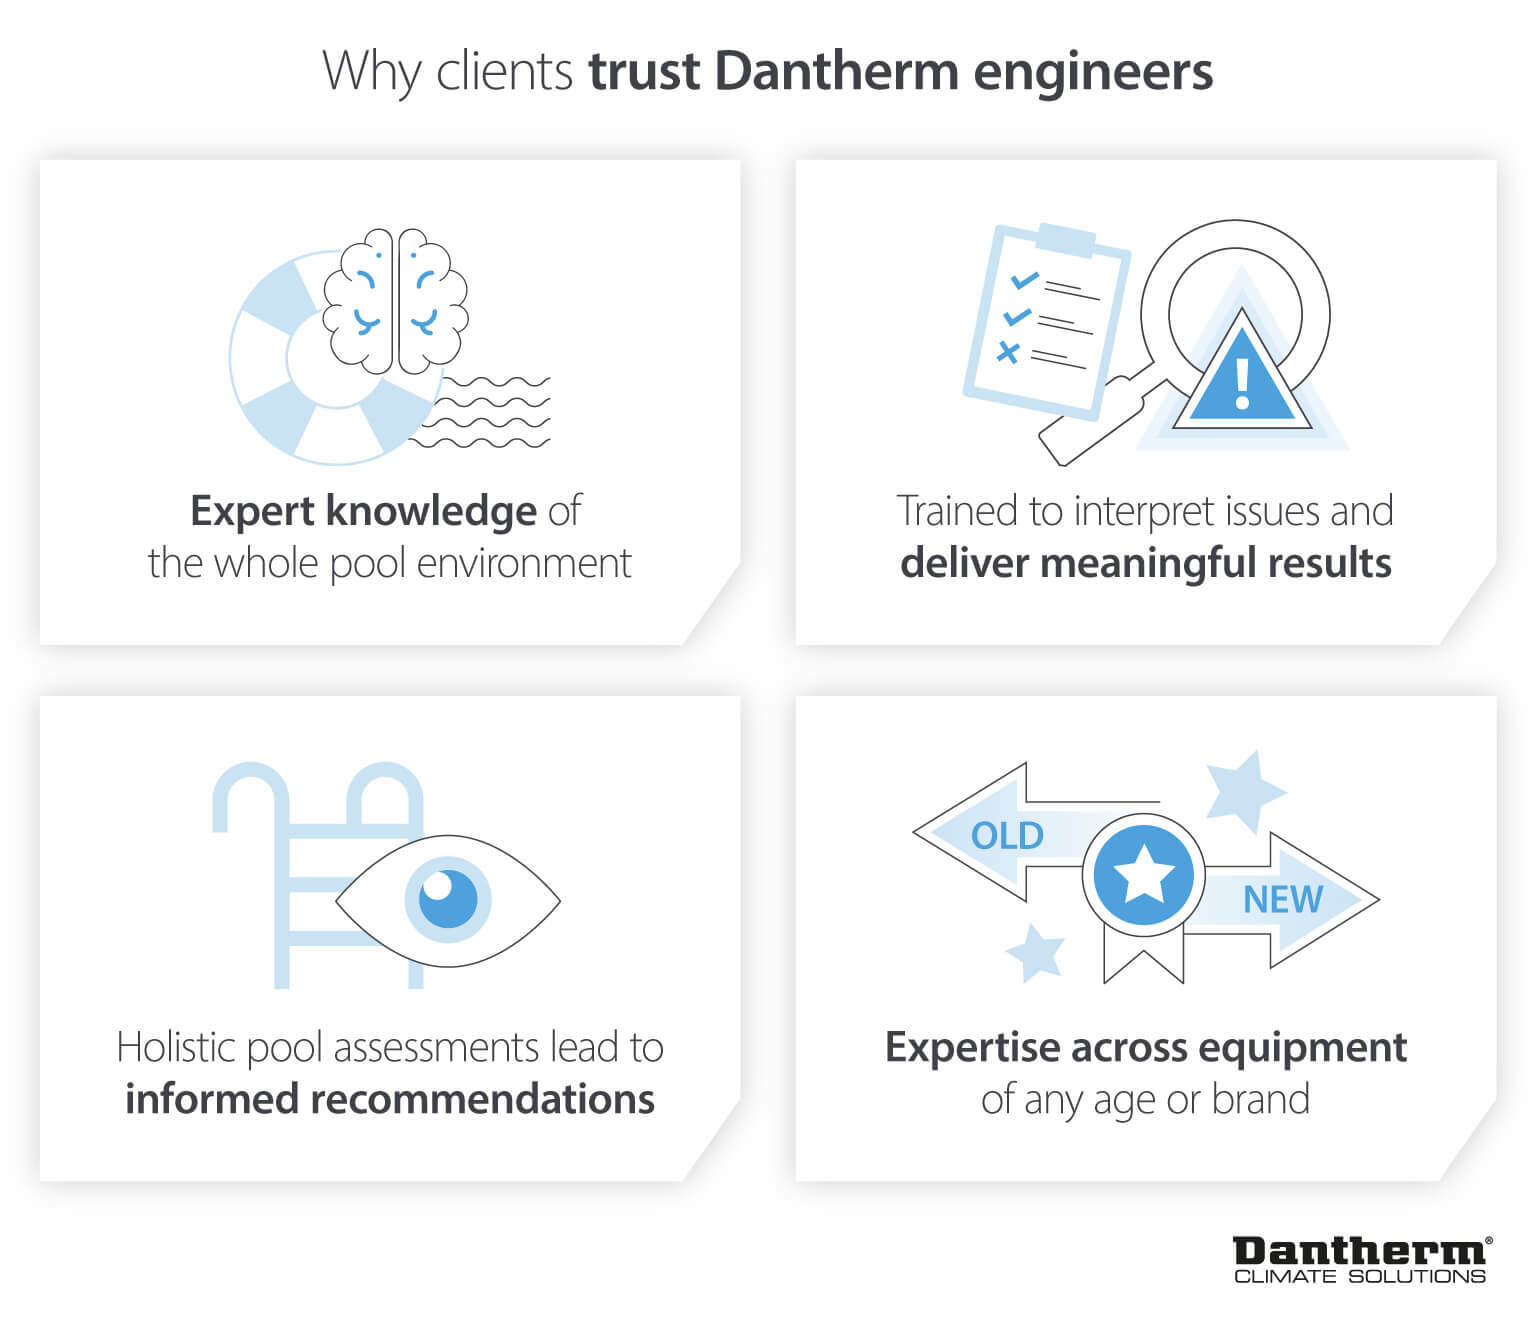 Reasons to trust Dantherm expertise and technology to help save money on energy - infographic image